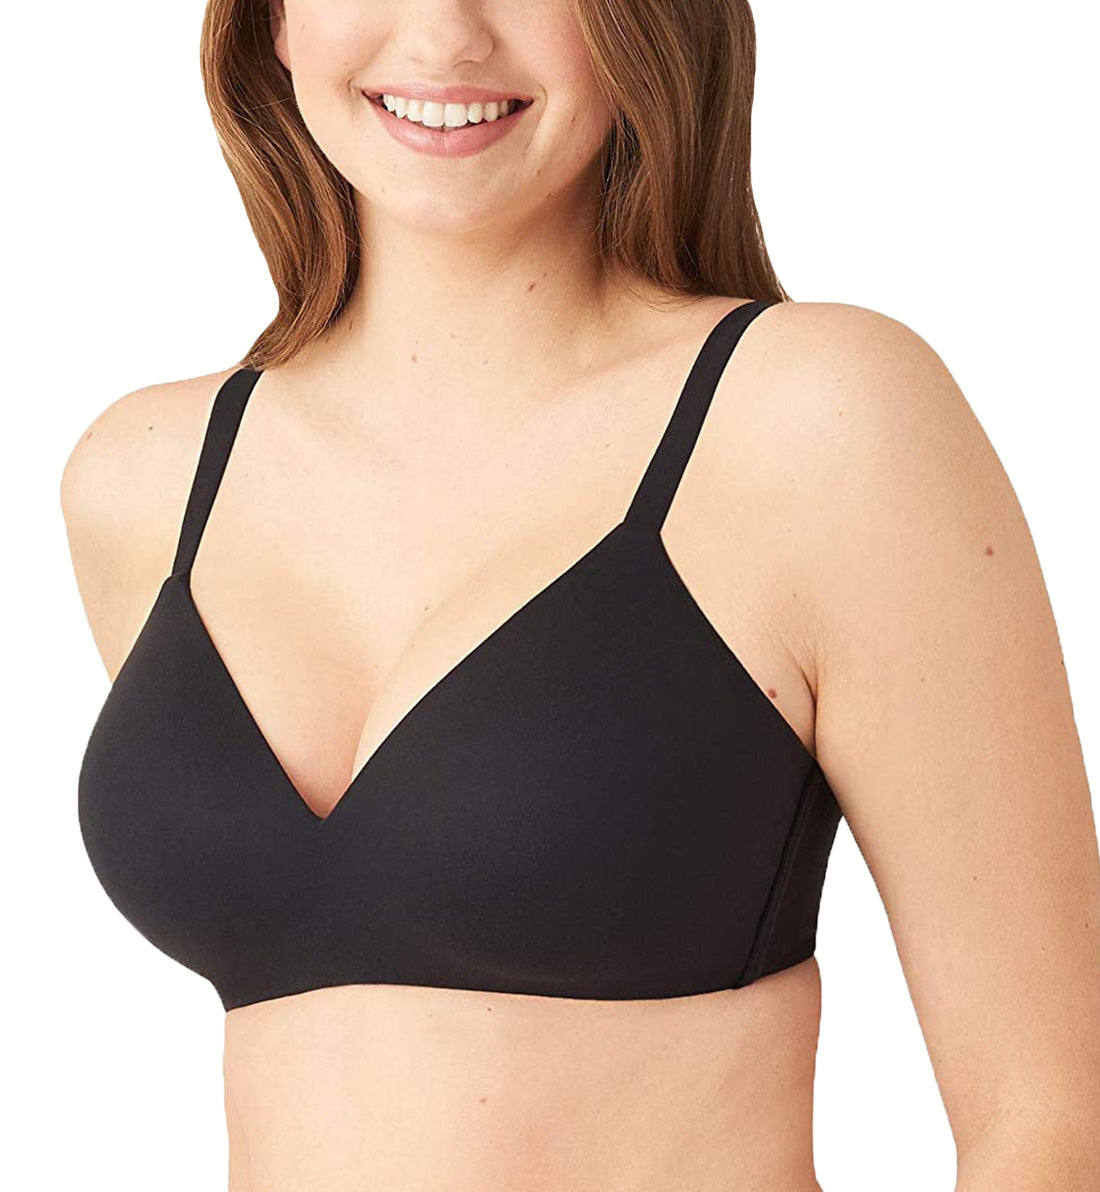 Find your perfect t-shirt bra today! Wacoal's La Femme is one of